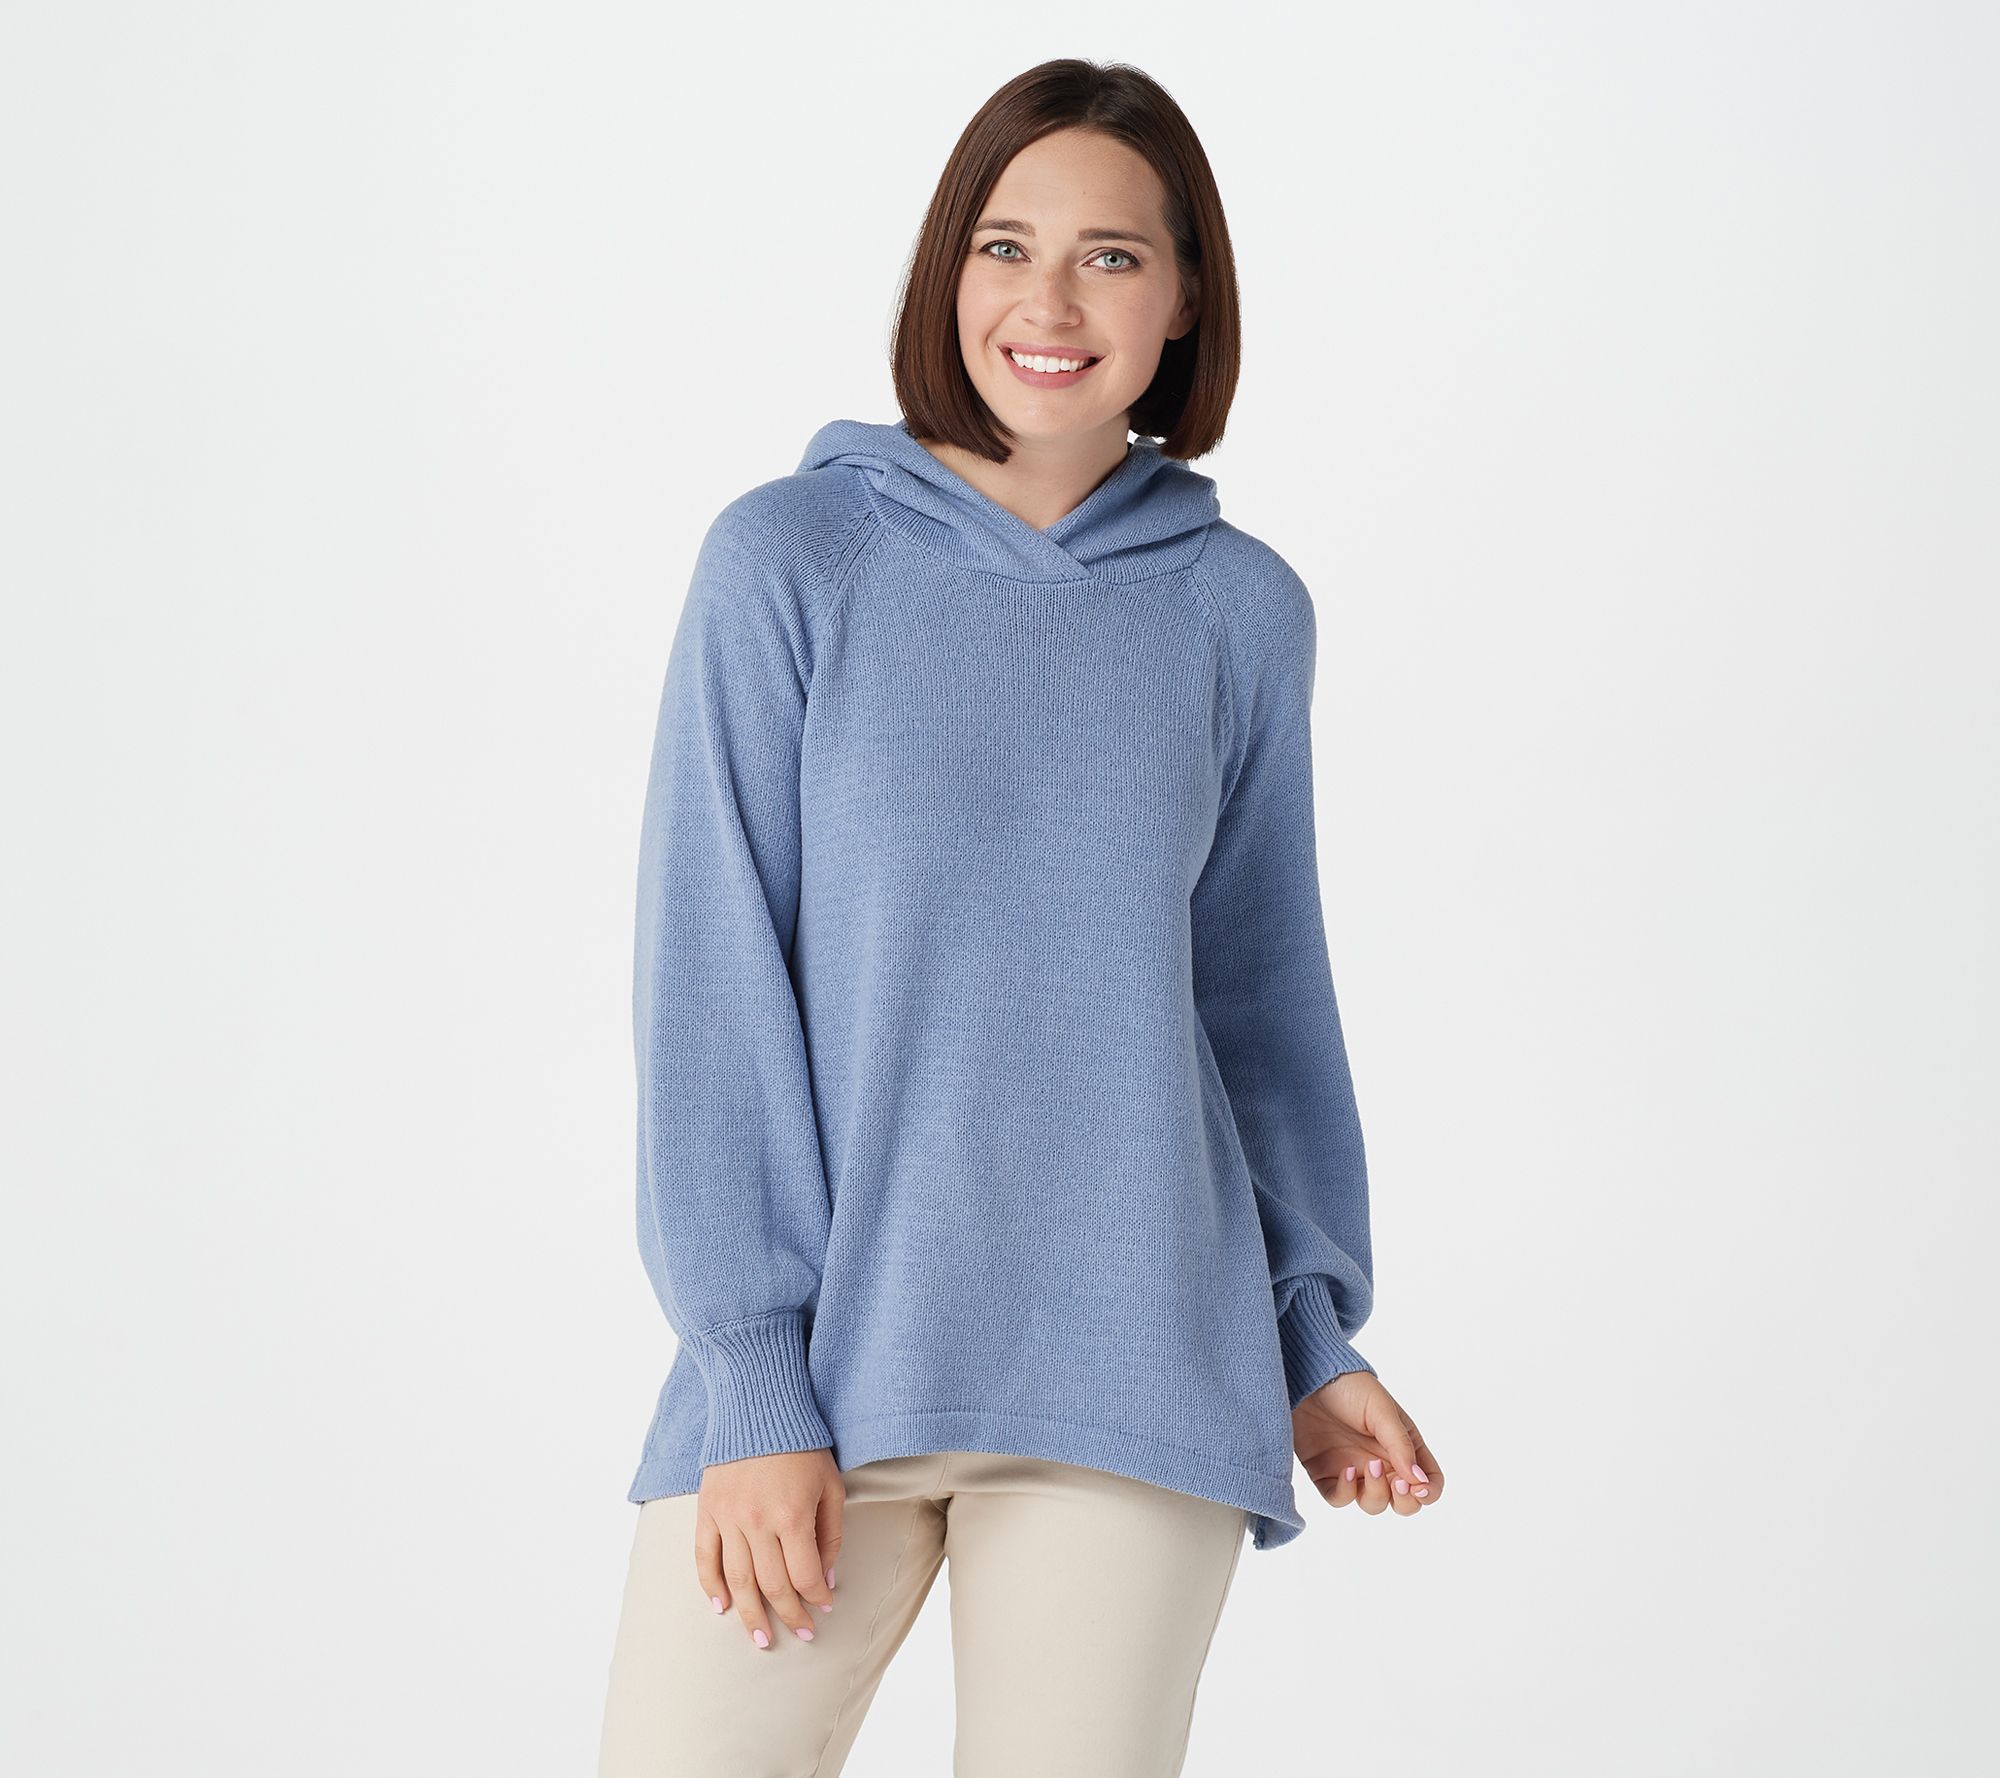 AnyBody Sweater Knit Pullover Hoodie - QVC.com